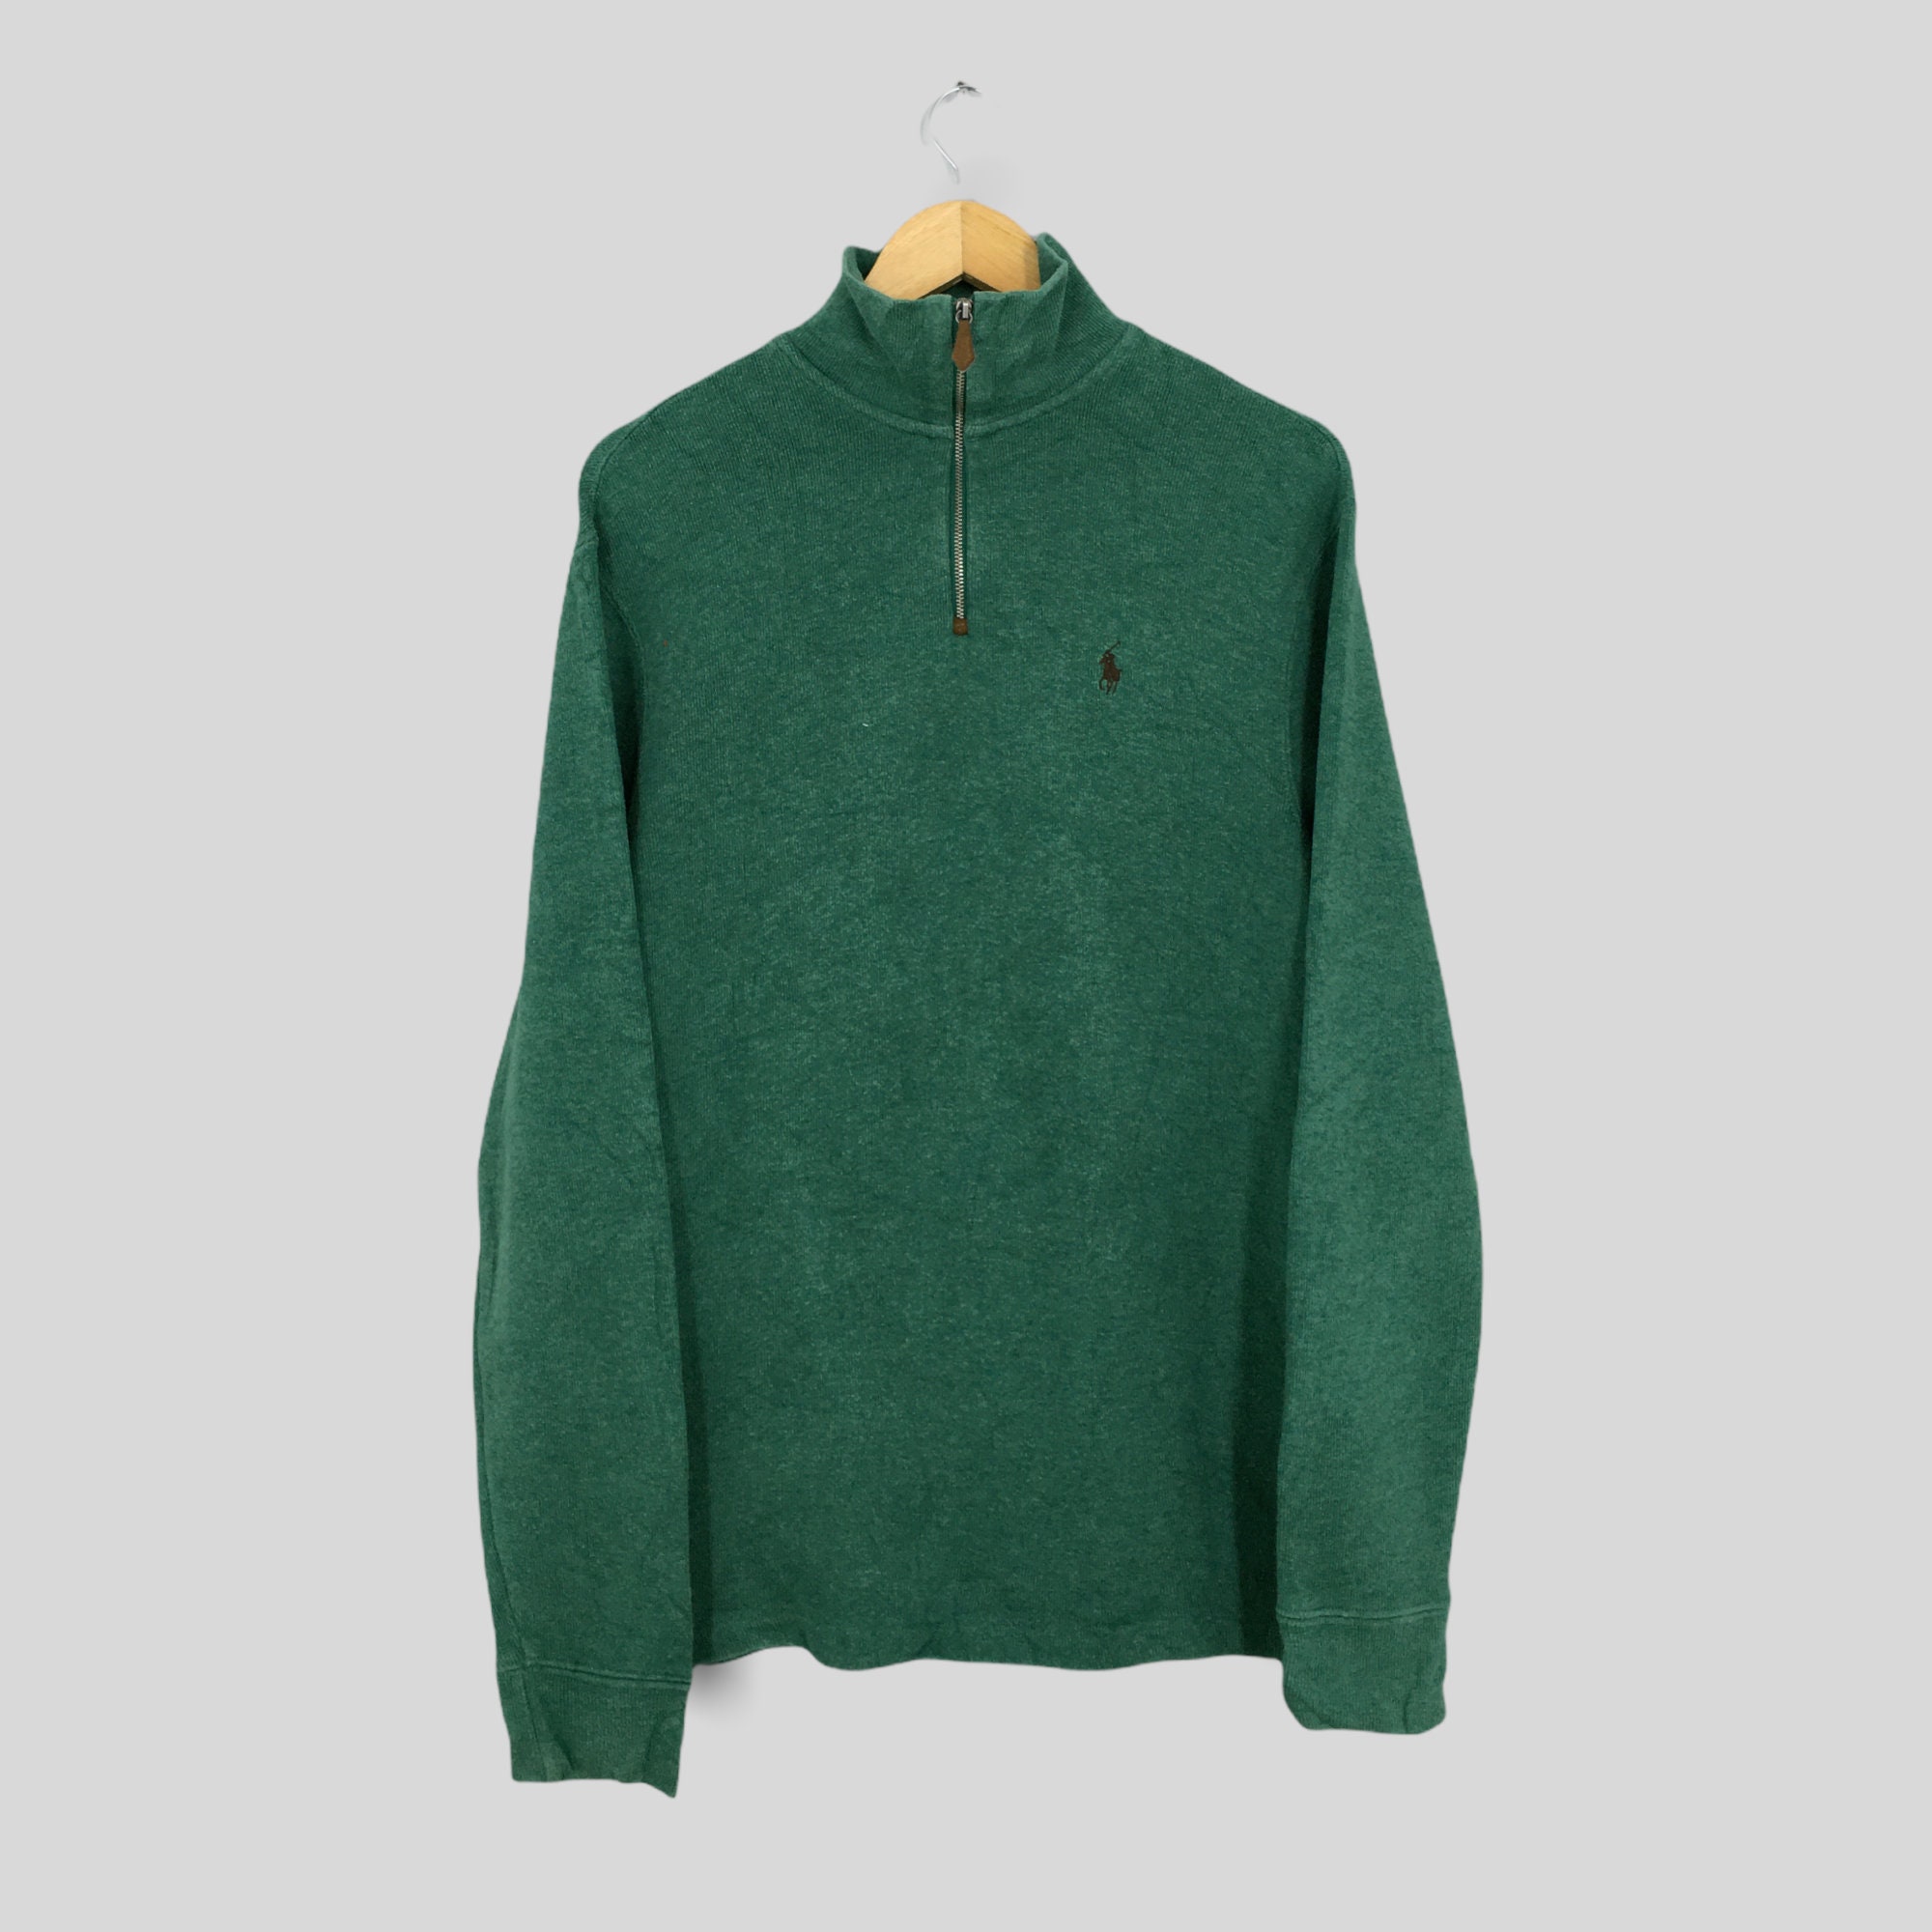 Vintage Polo Ralph Lauren Green Sweater Small 90's Ralph - Etsy